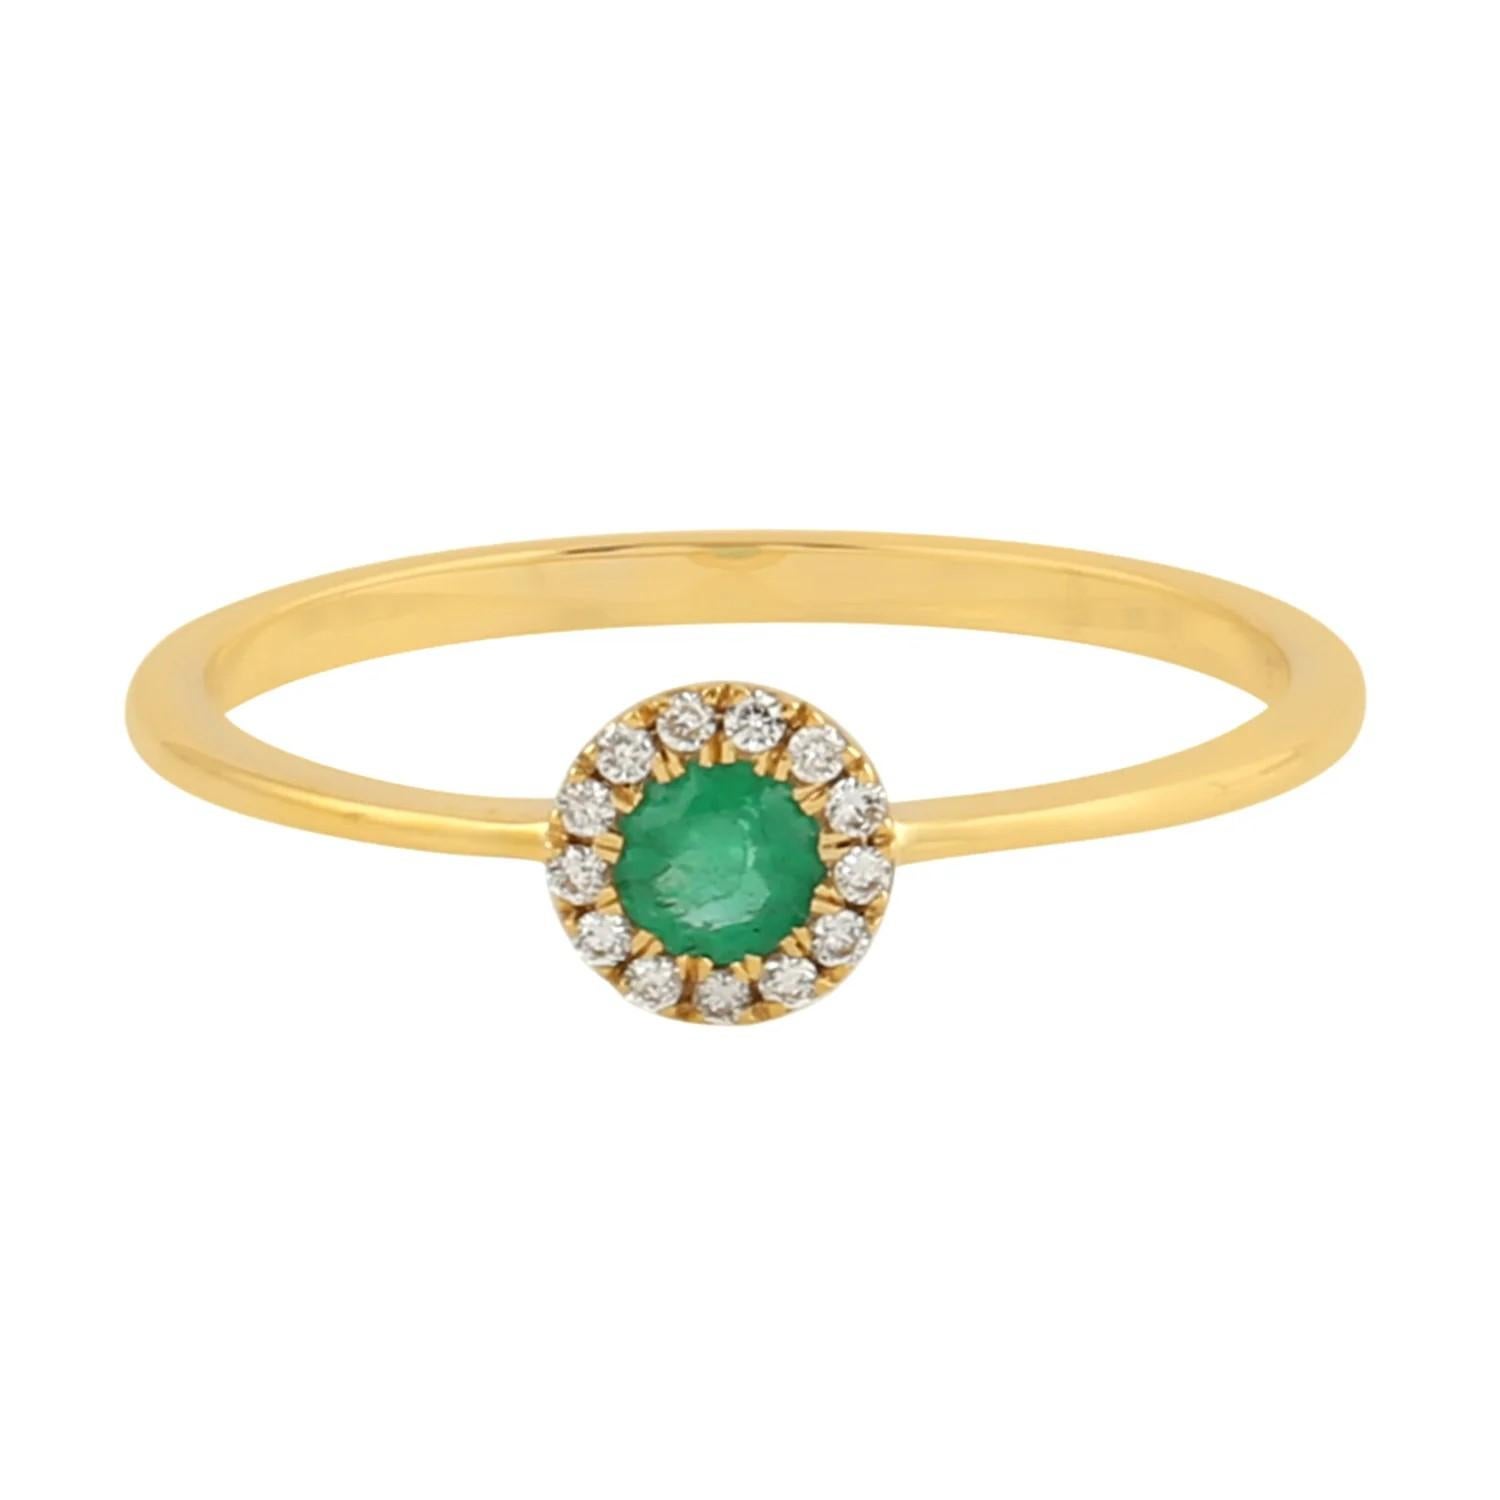 Round Cut Meghna Jewels Round Emerald Diamond Halo Ring 18k Yellow Gold For Sale